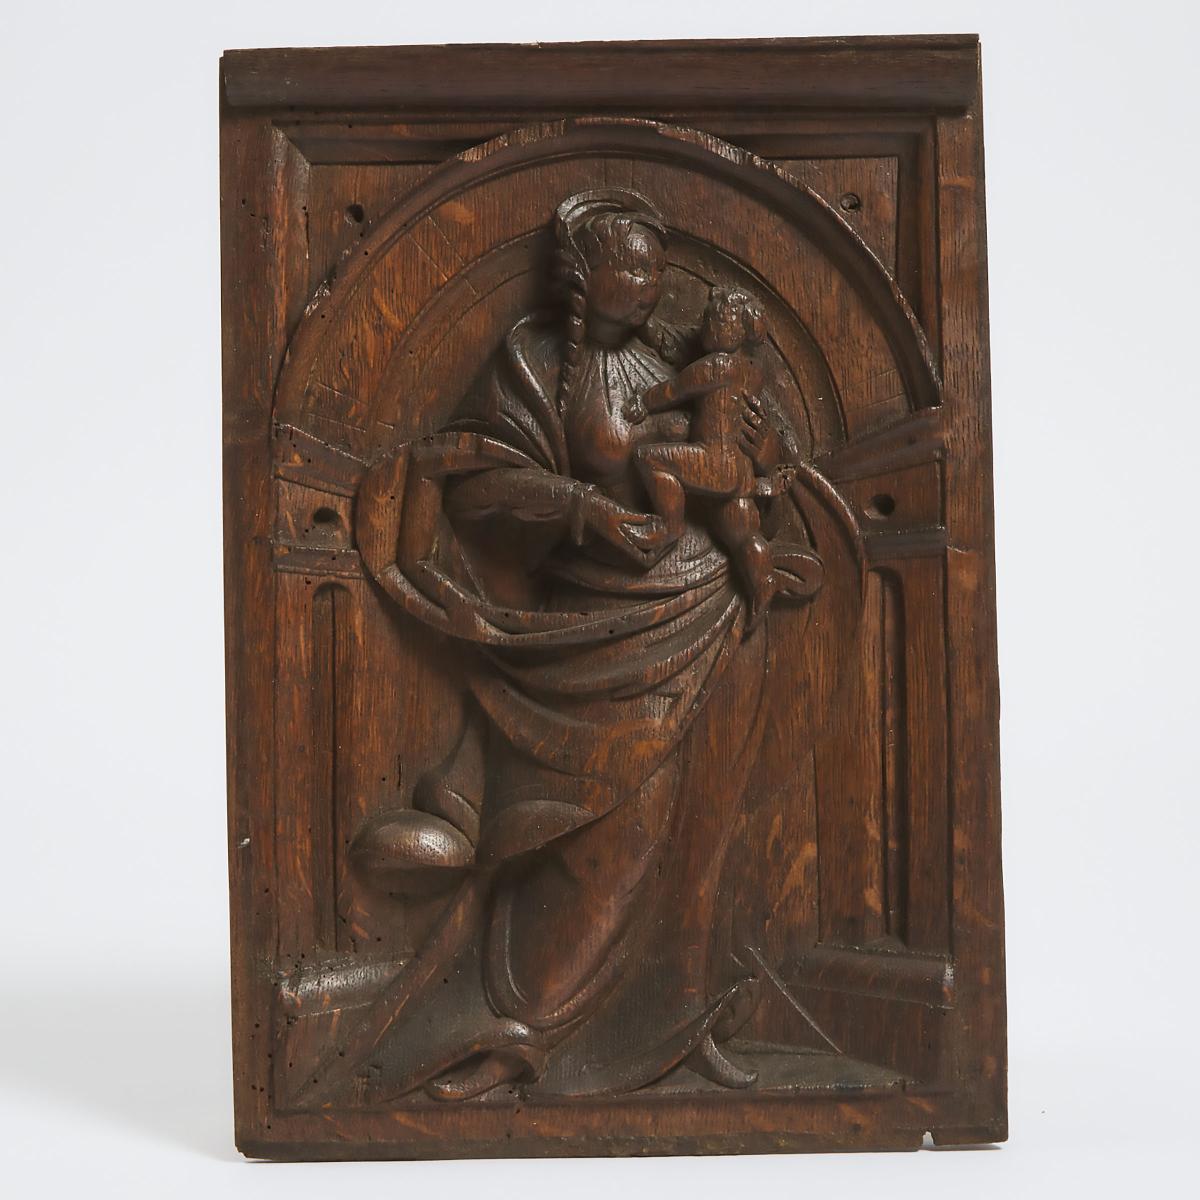 French Renaissance Relief Carved Oak Cupboard Panel of the Madonna and Child, 17th century, 13.6 x 9